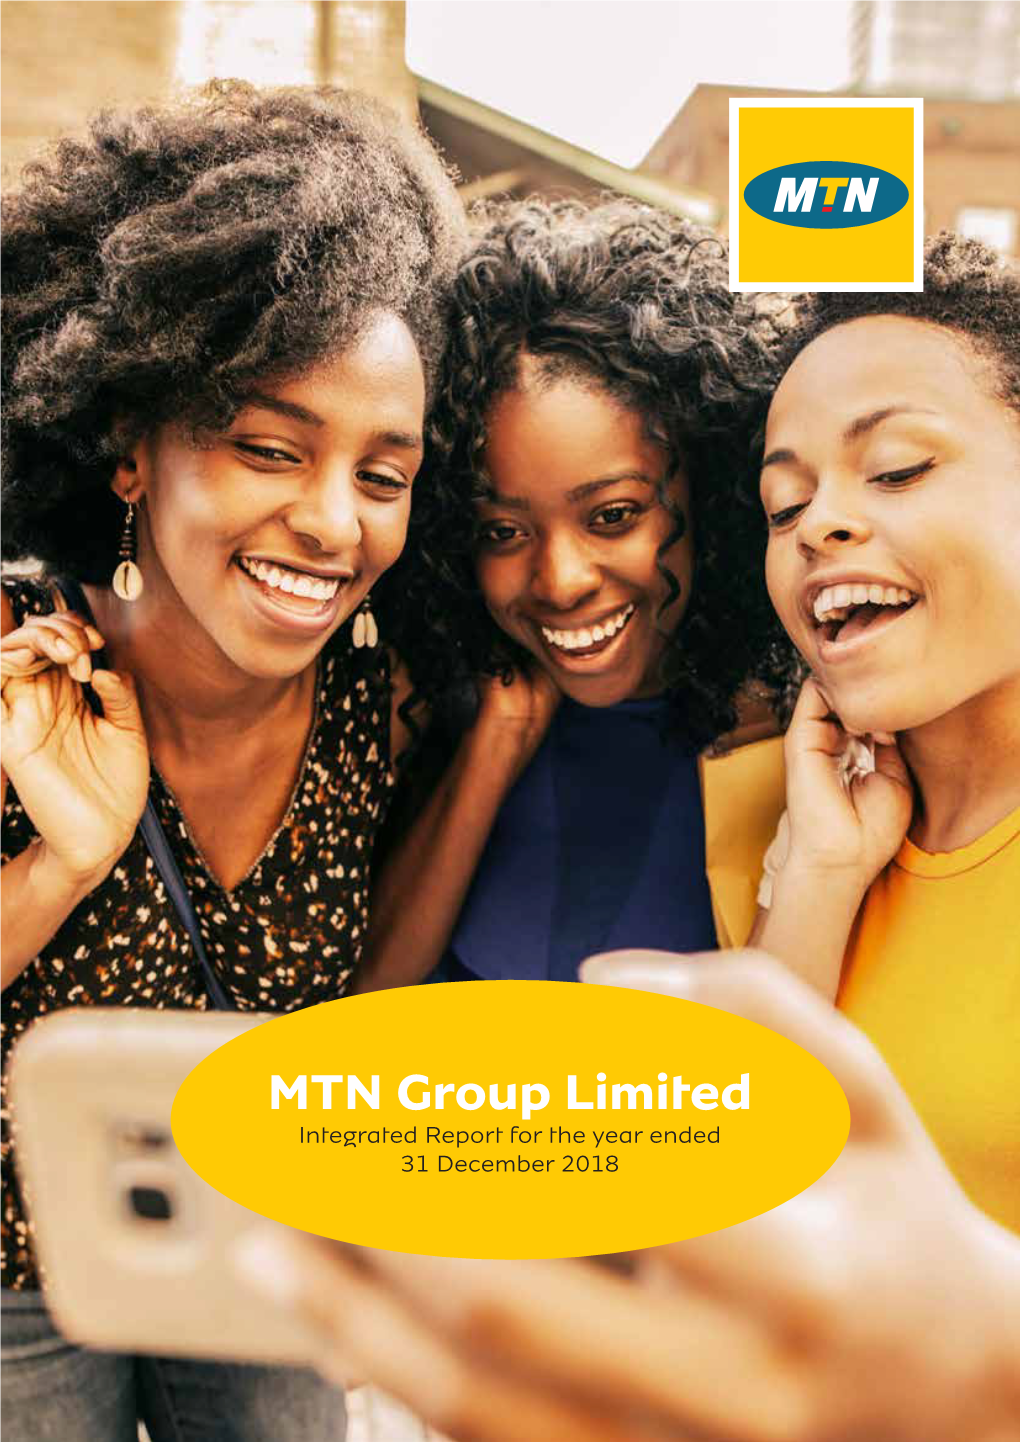 MTN Group Limited Integrated Report for the Year Ended 31 December 2018